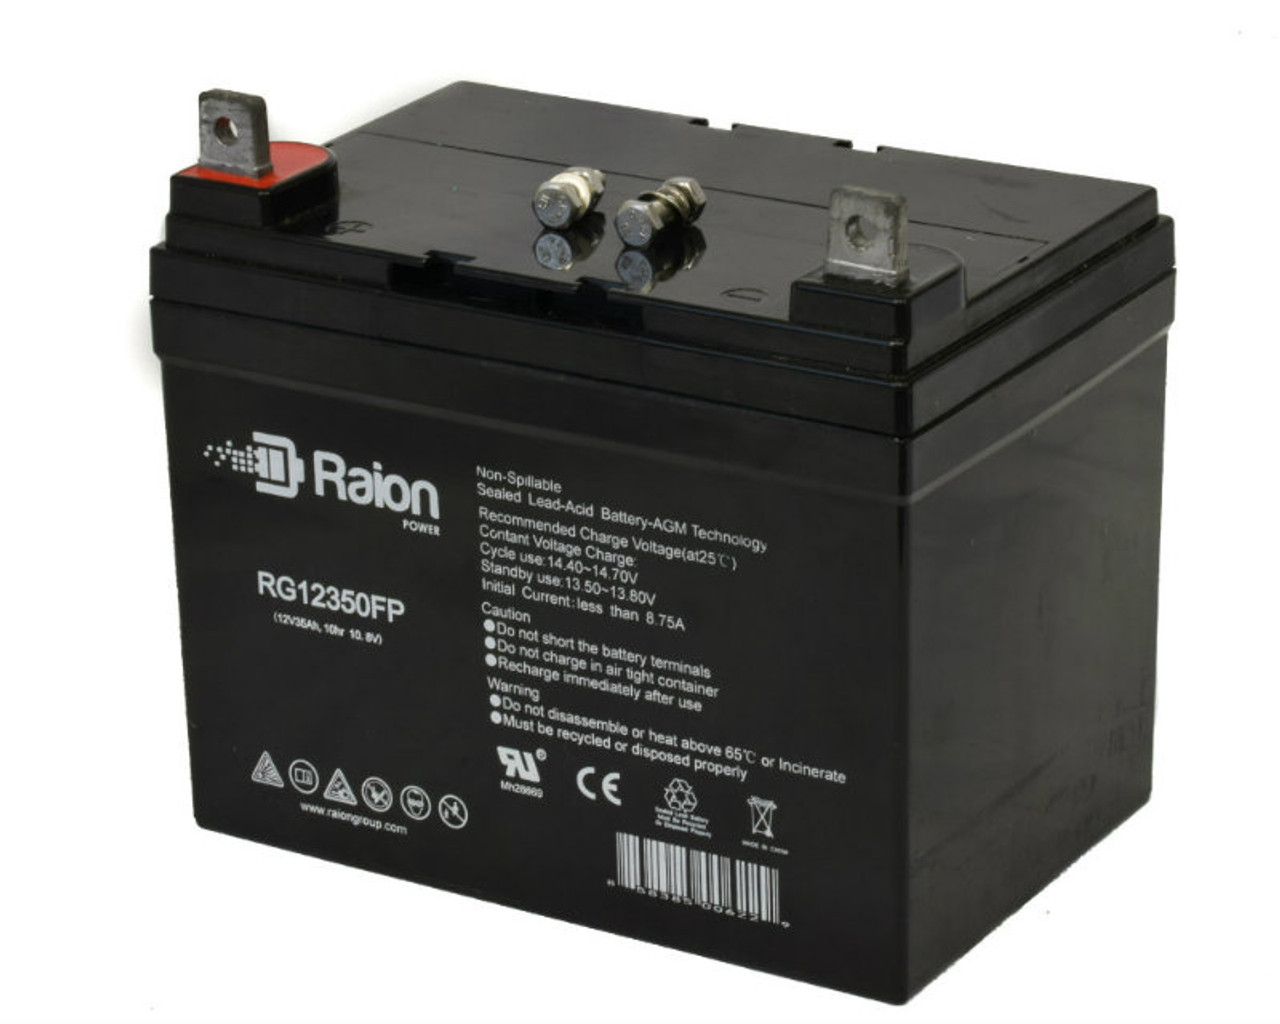 Raion Power Replacement 12V 35Ah RG12350FP Battery for Murray 42531X8